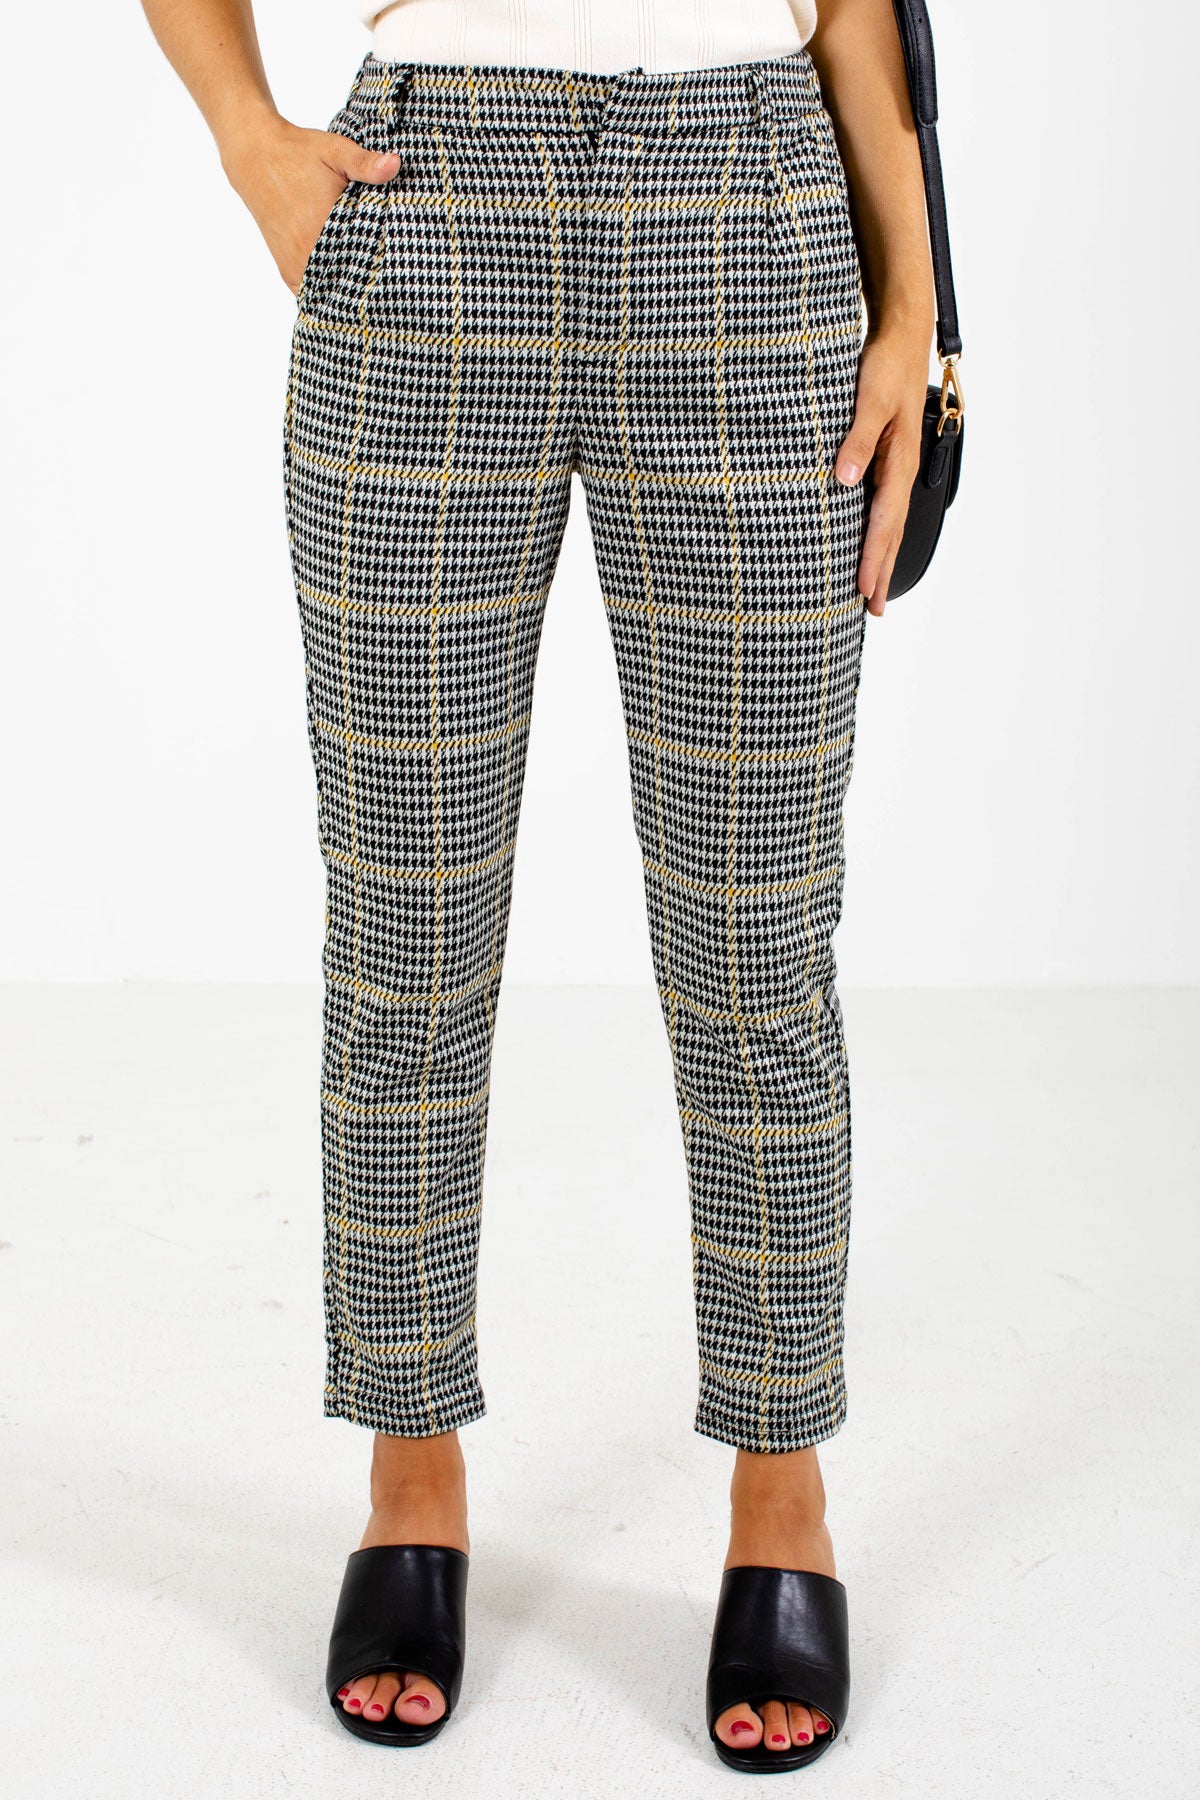 Mustard and Gray Houndstooth Patterned Boutique Pants for Women